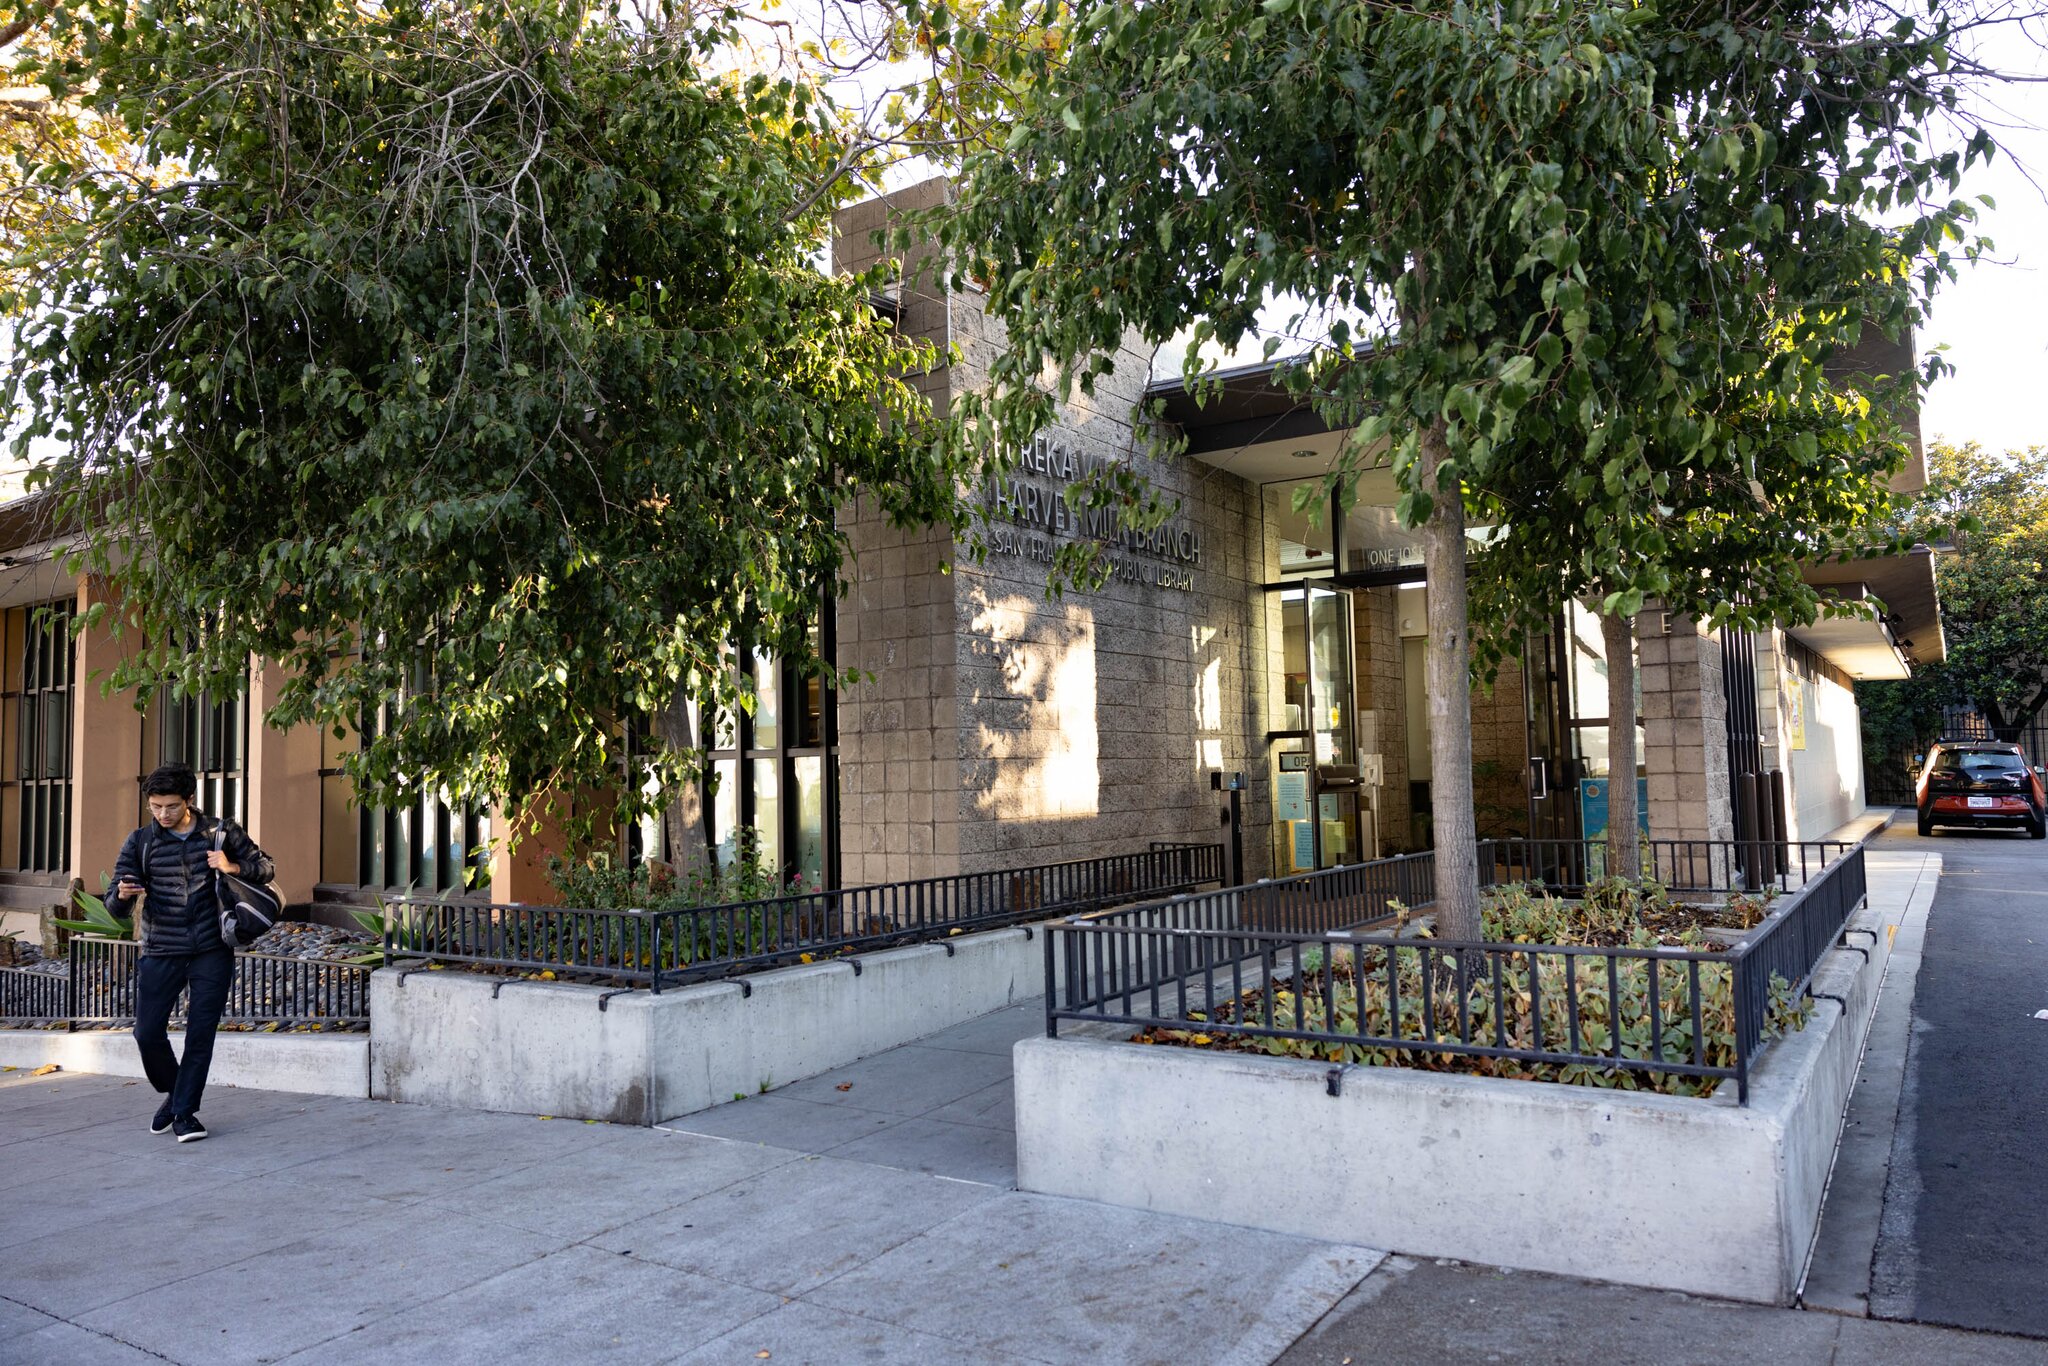 A pedestrian walks near a grey building's entrance, which has trees planted near it.